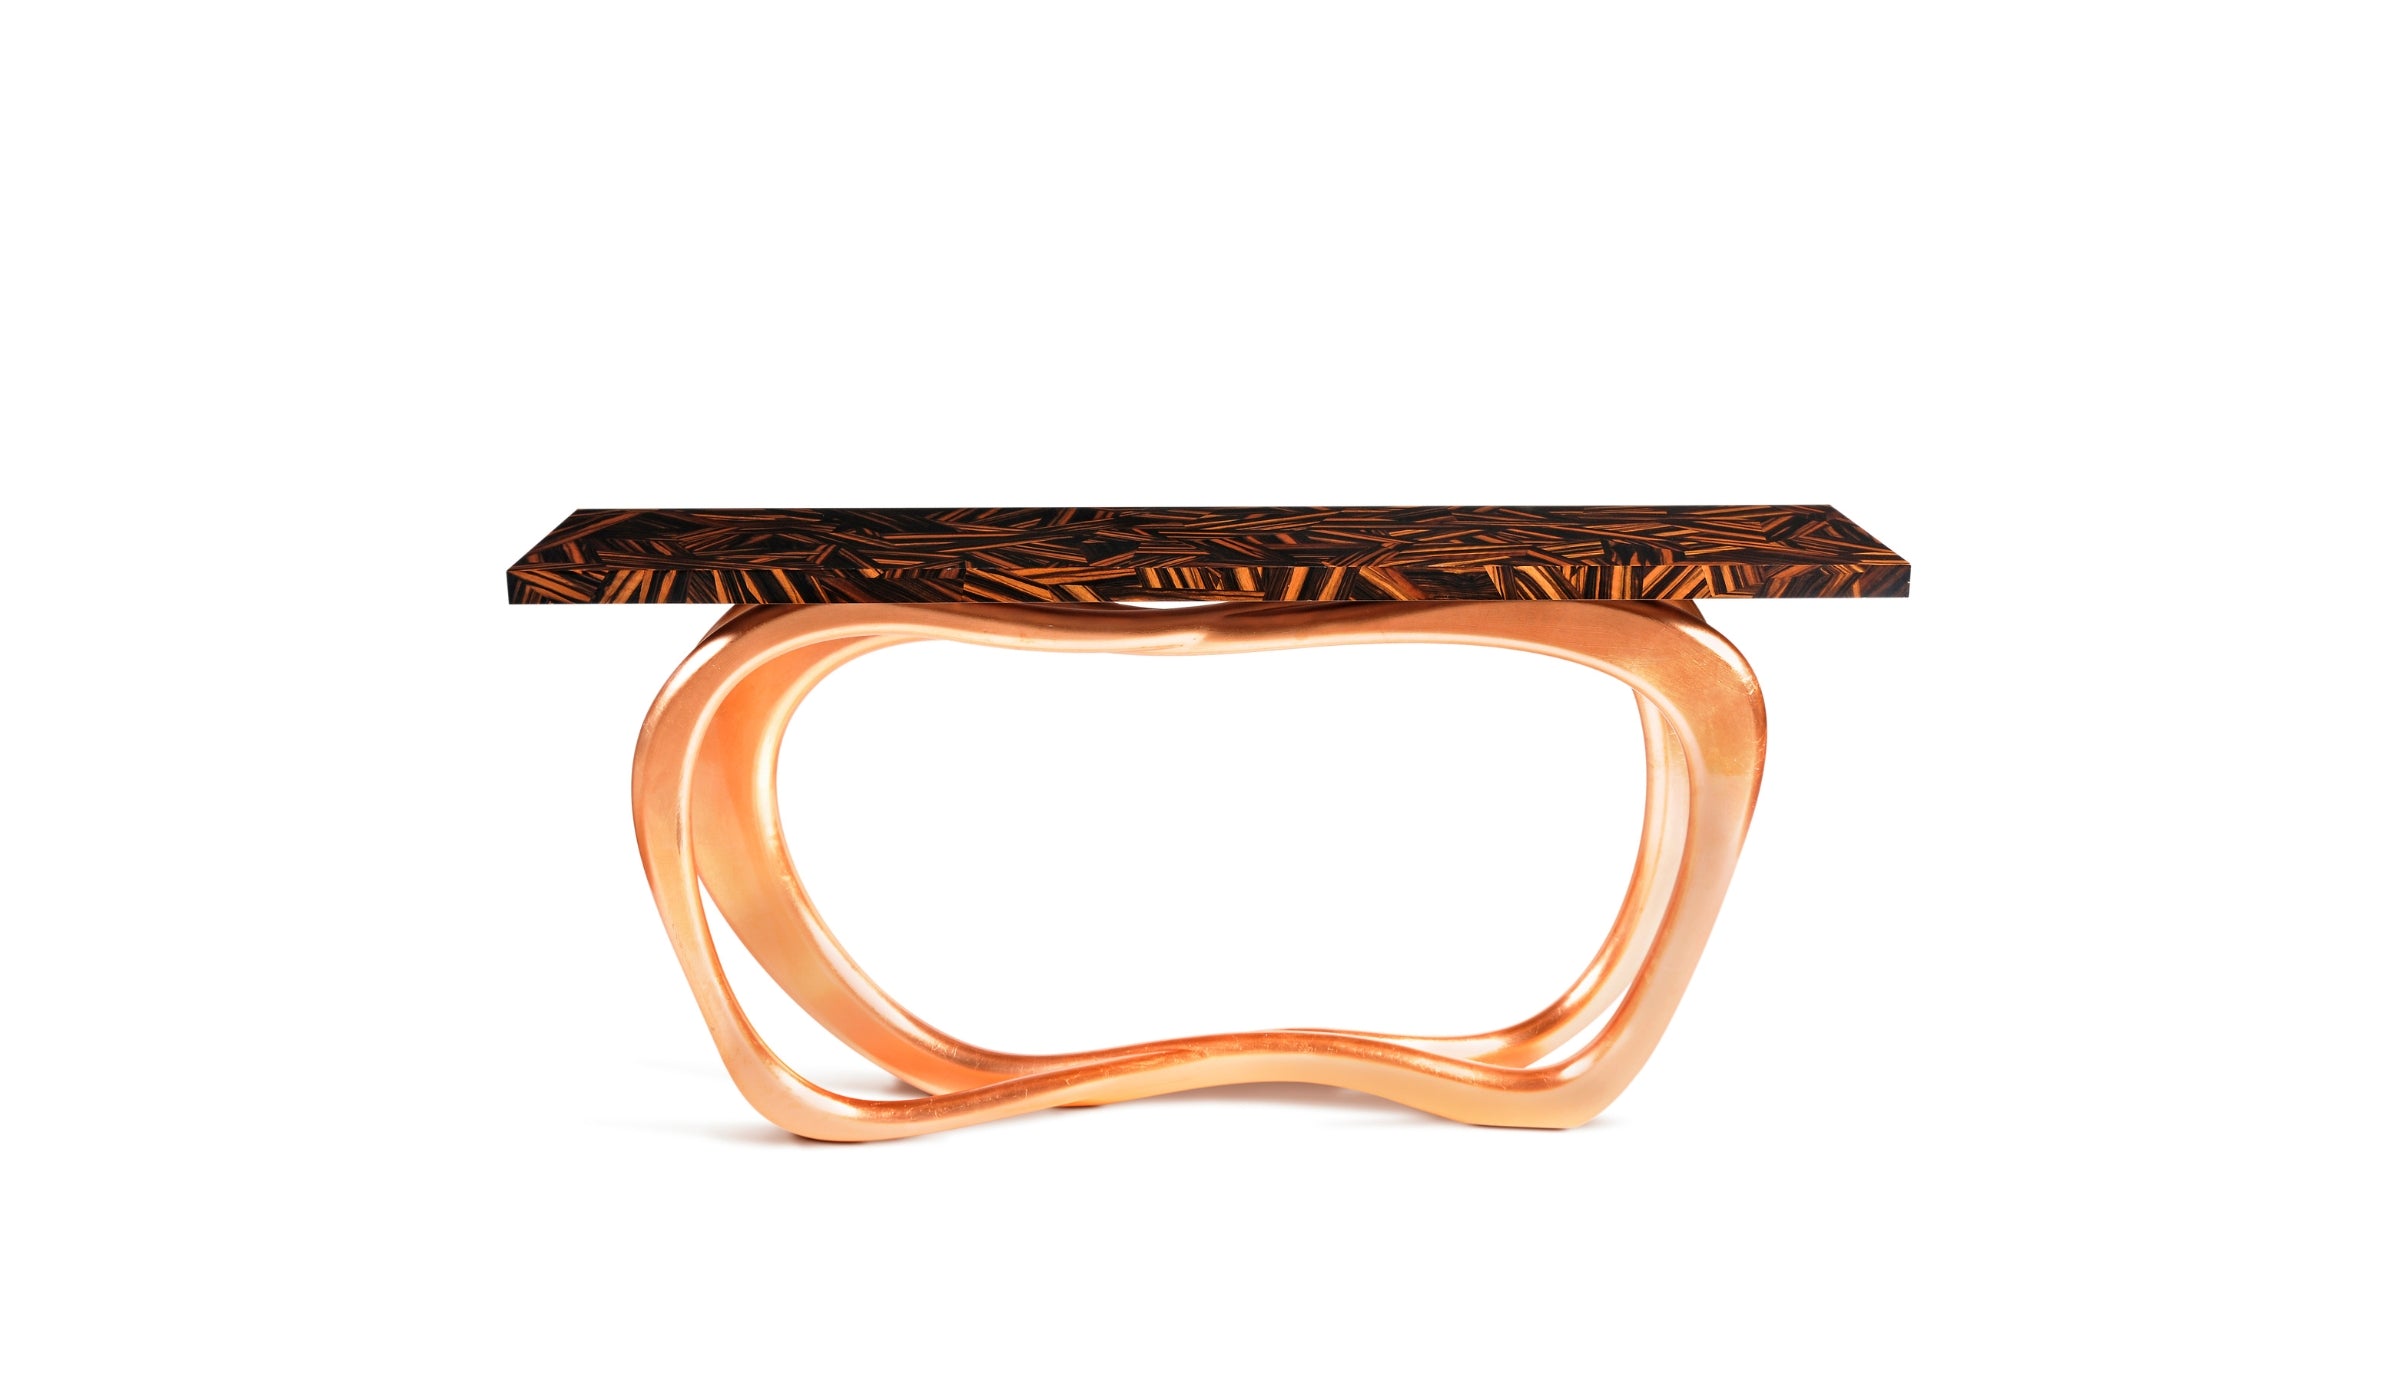 Infinity - Sculptural handcrafted console in ebony and polished copper